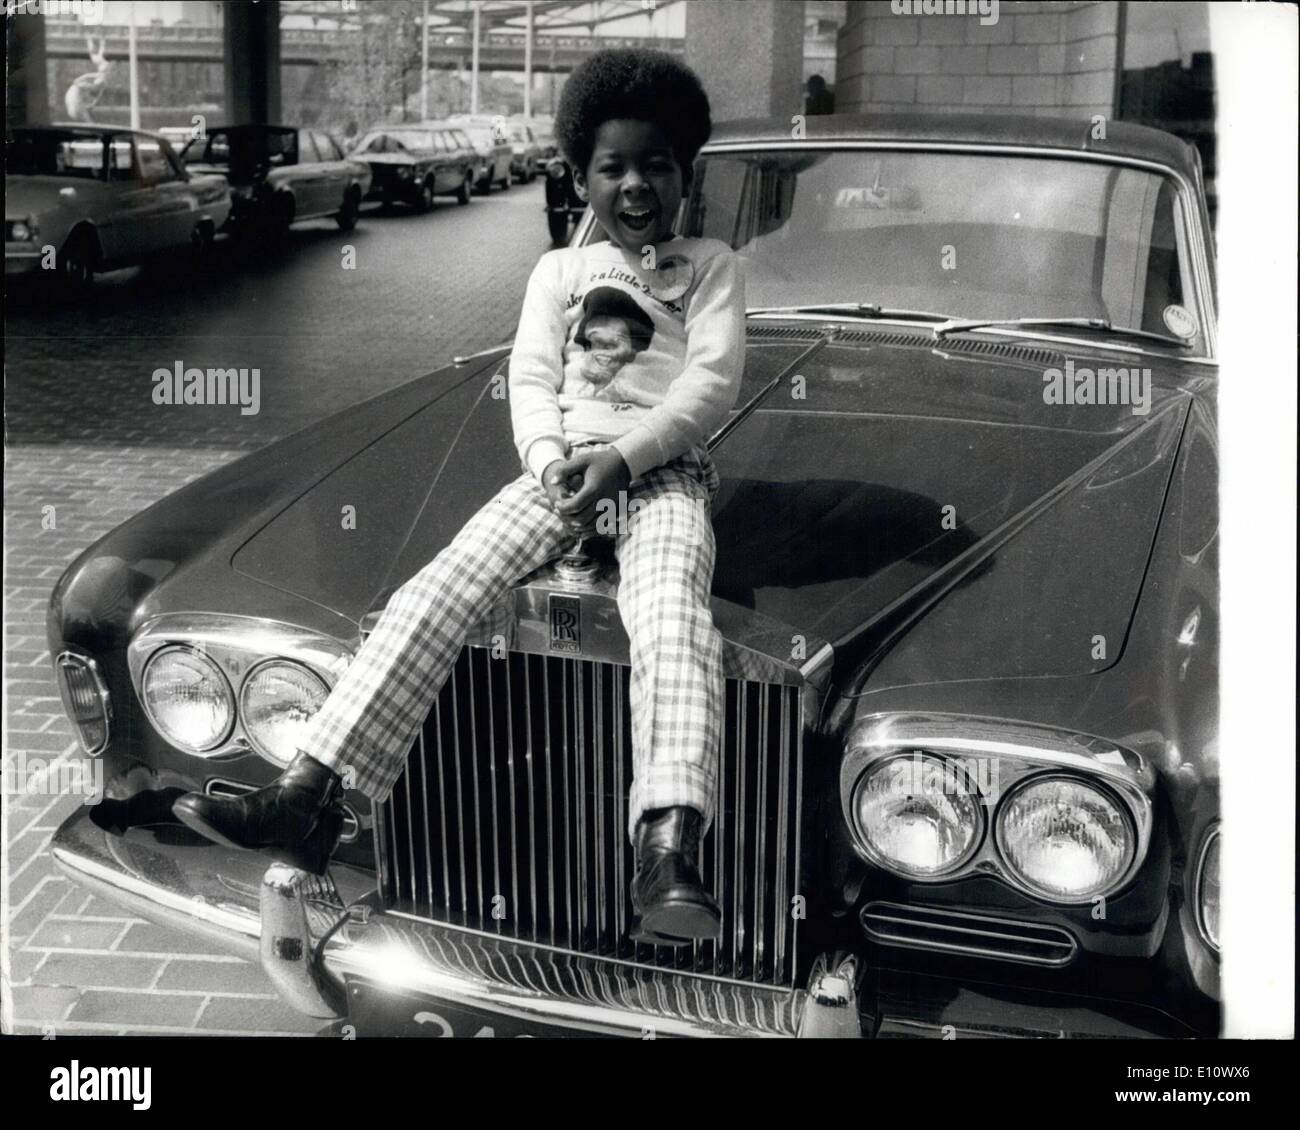 May 05, 1974 - Five year old superstar in London: Pop star and actor Rodney Allen Rippy, who is a superstar at the age of 5, arrived in London today from America. Rodney, son of an American ethnic dustman, first shot to fame when he appeared in a TV hamburger commercial at the age of 3. He is expected to be a dollar millionaire by the time he is six. Rodney is over here to appear on Yorkshire Television's Junior Showtime. Today he gave a press conference at the Tower Hotel, St. Catherine's Way, London Stock Photo